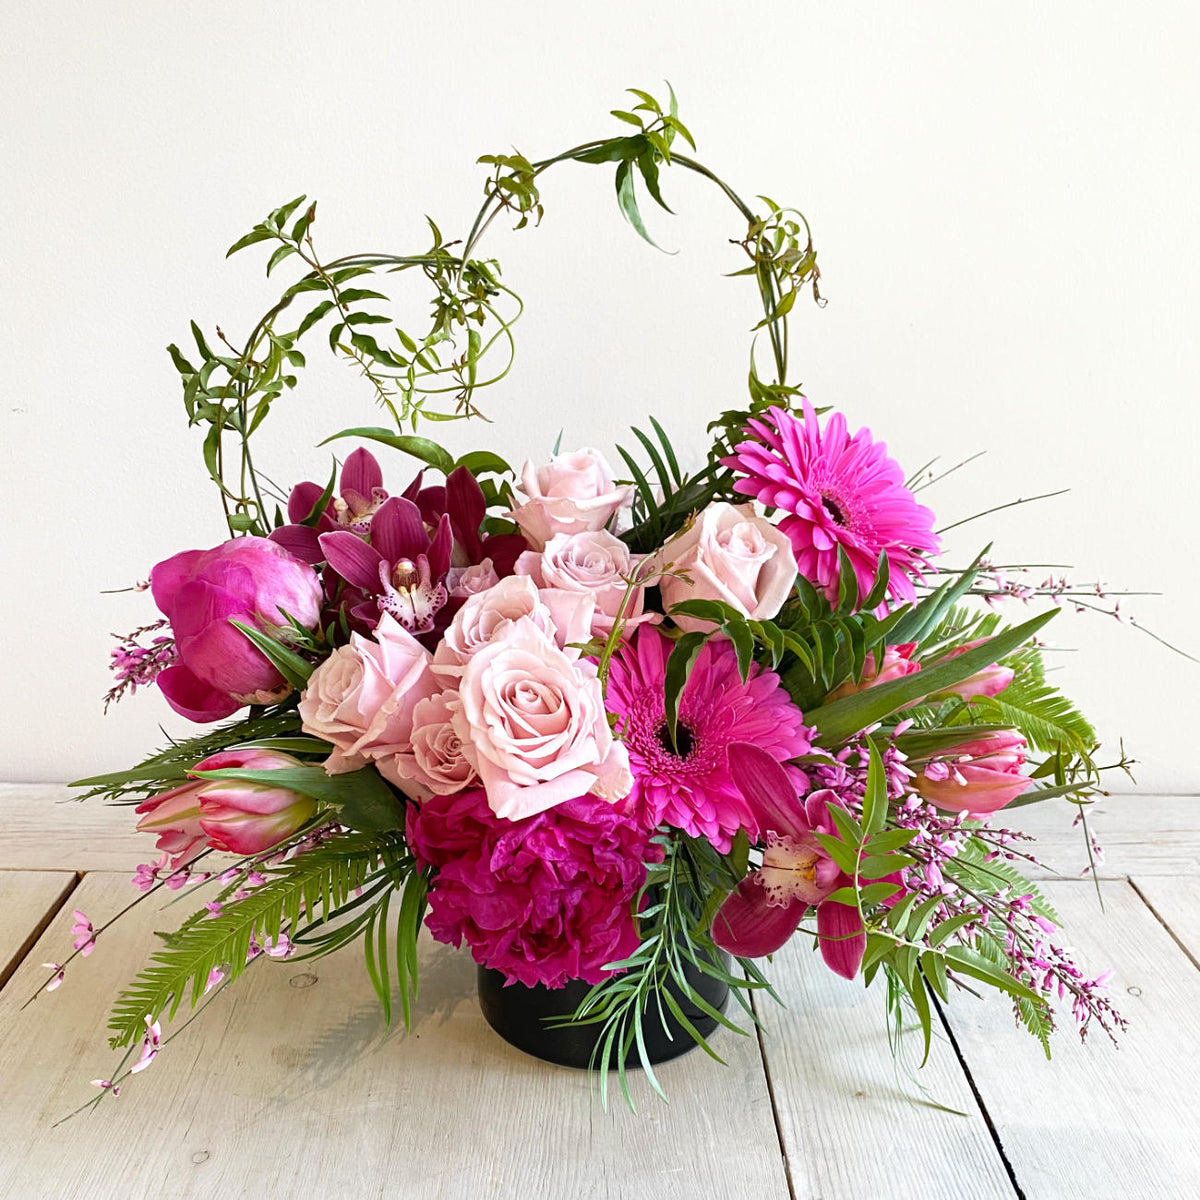 A beautiful flower arrangement in a gloss black vase, featuiring pink roses, orchids and gerbera daisy flowers